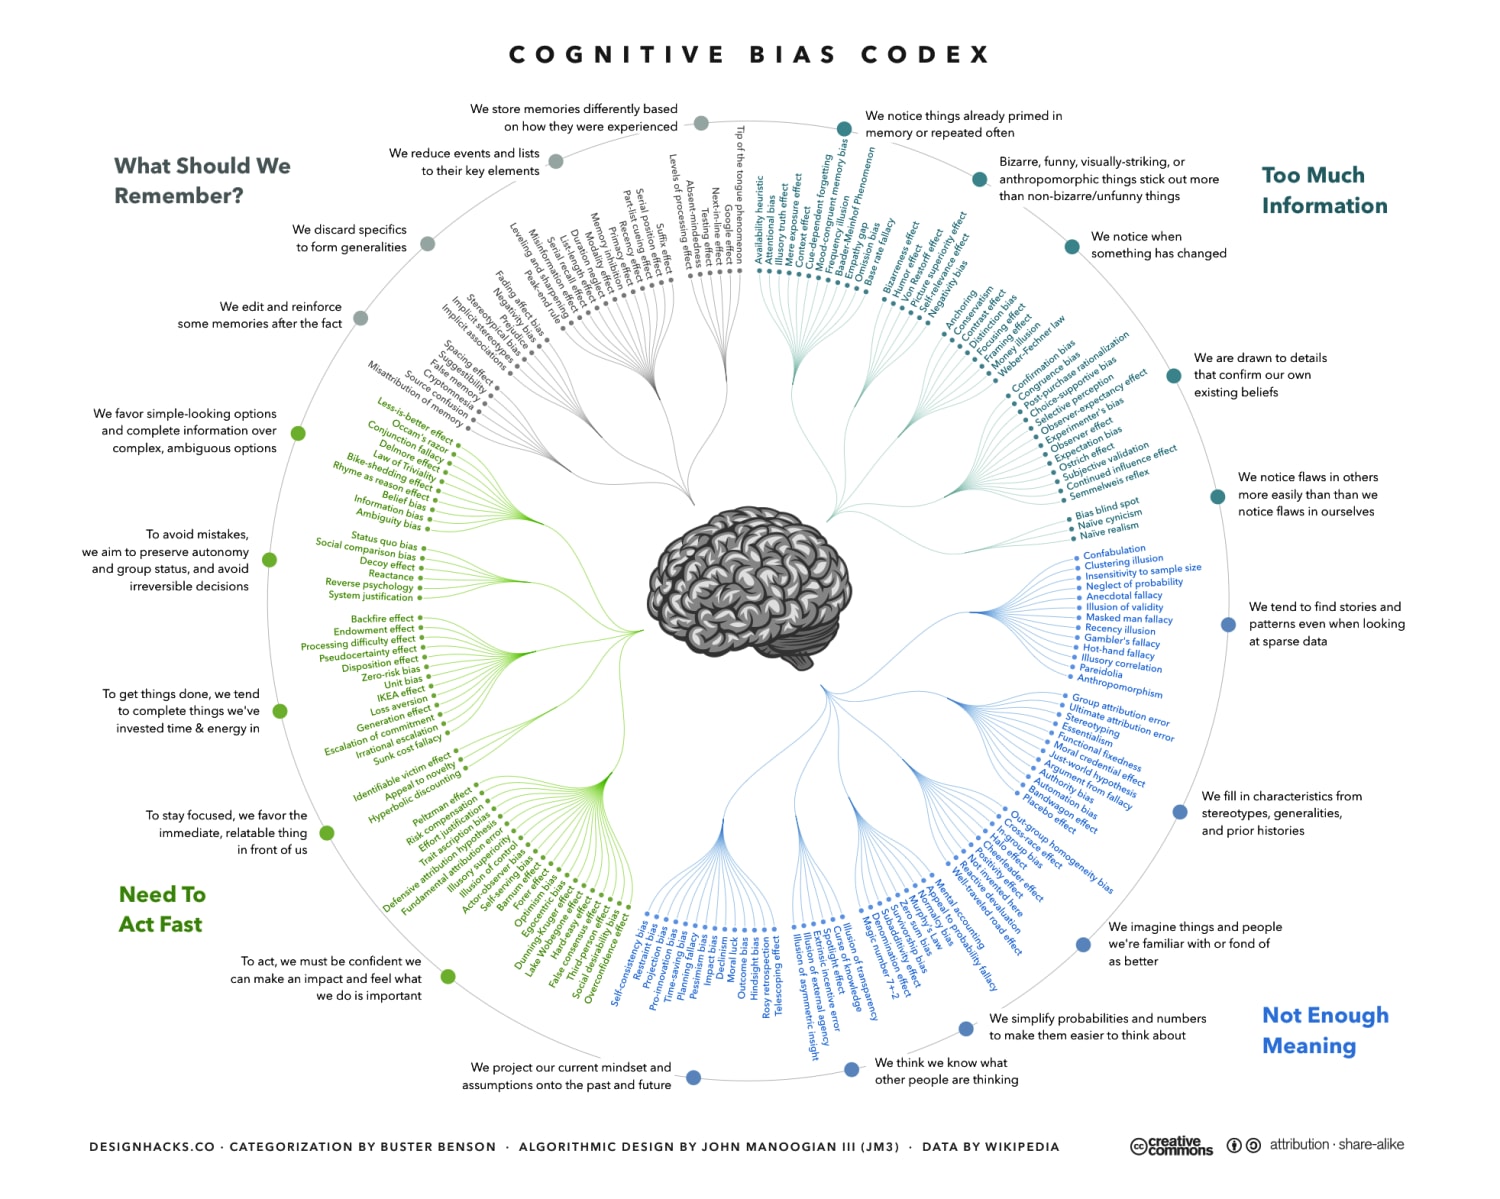 Cognitive bias codex. An inherent thinking 'blind spot' that reduces thinking accuracy and results inaccurate conclusions.